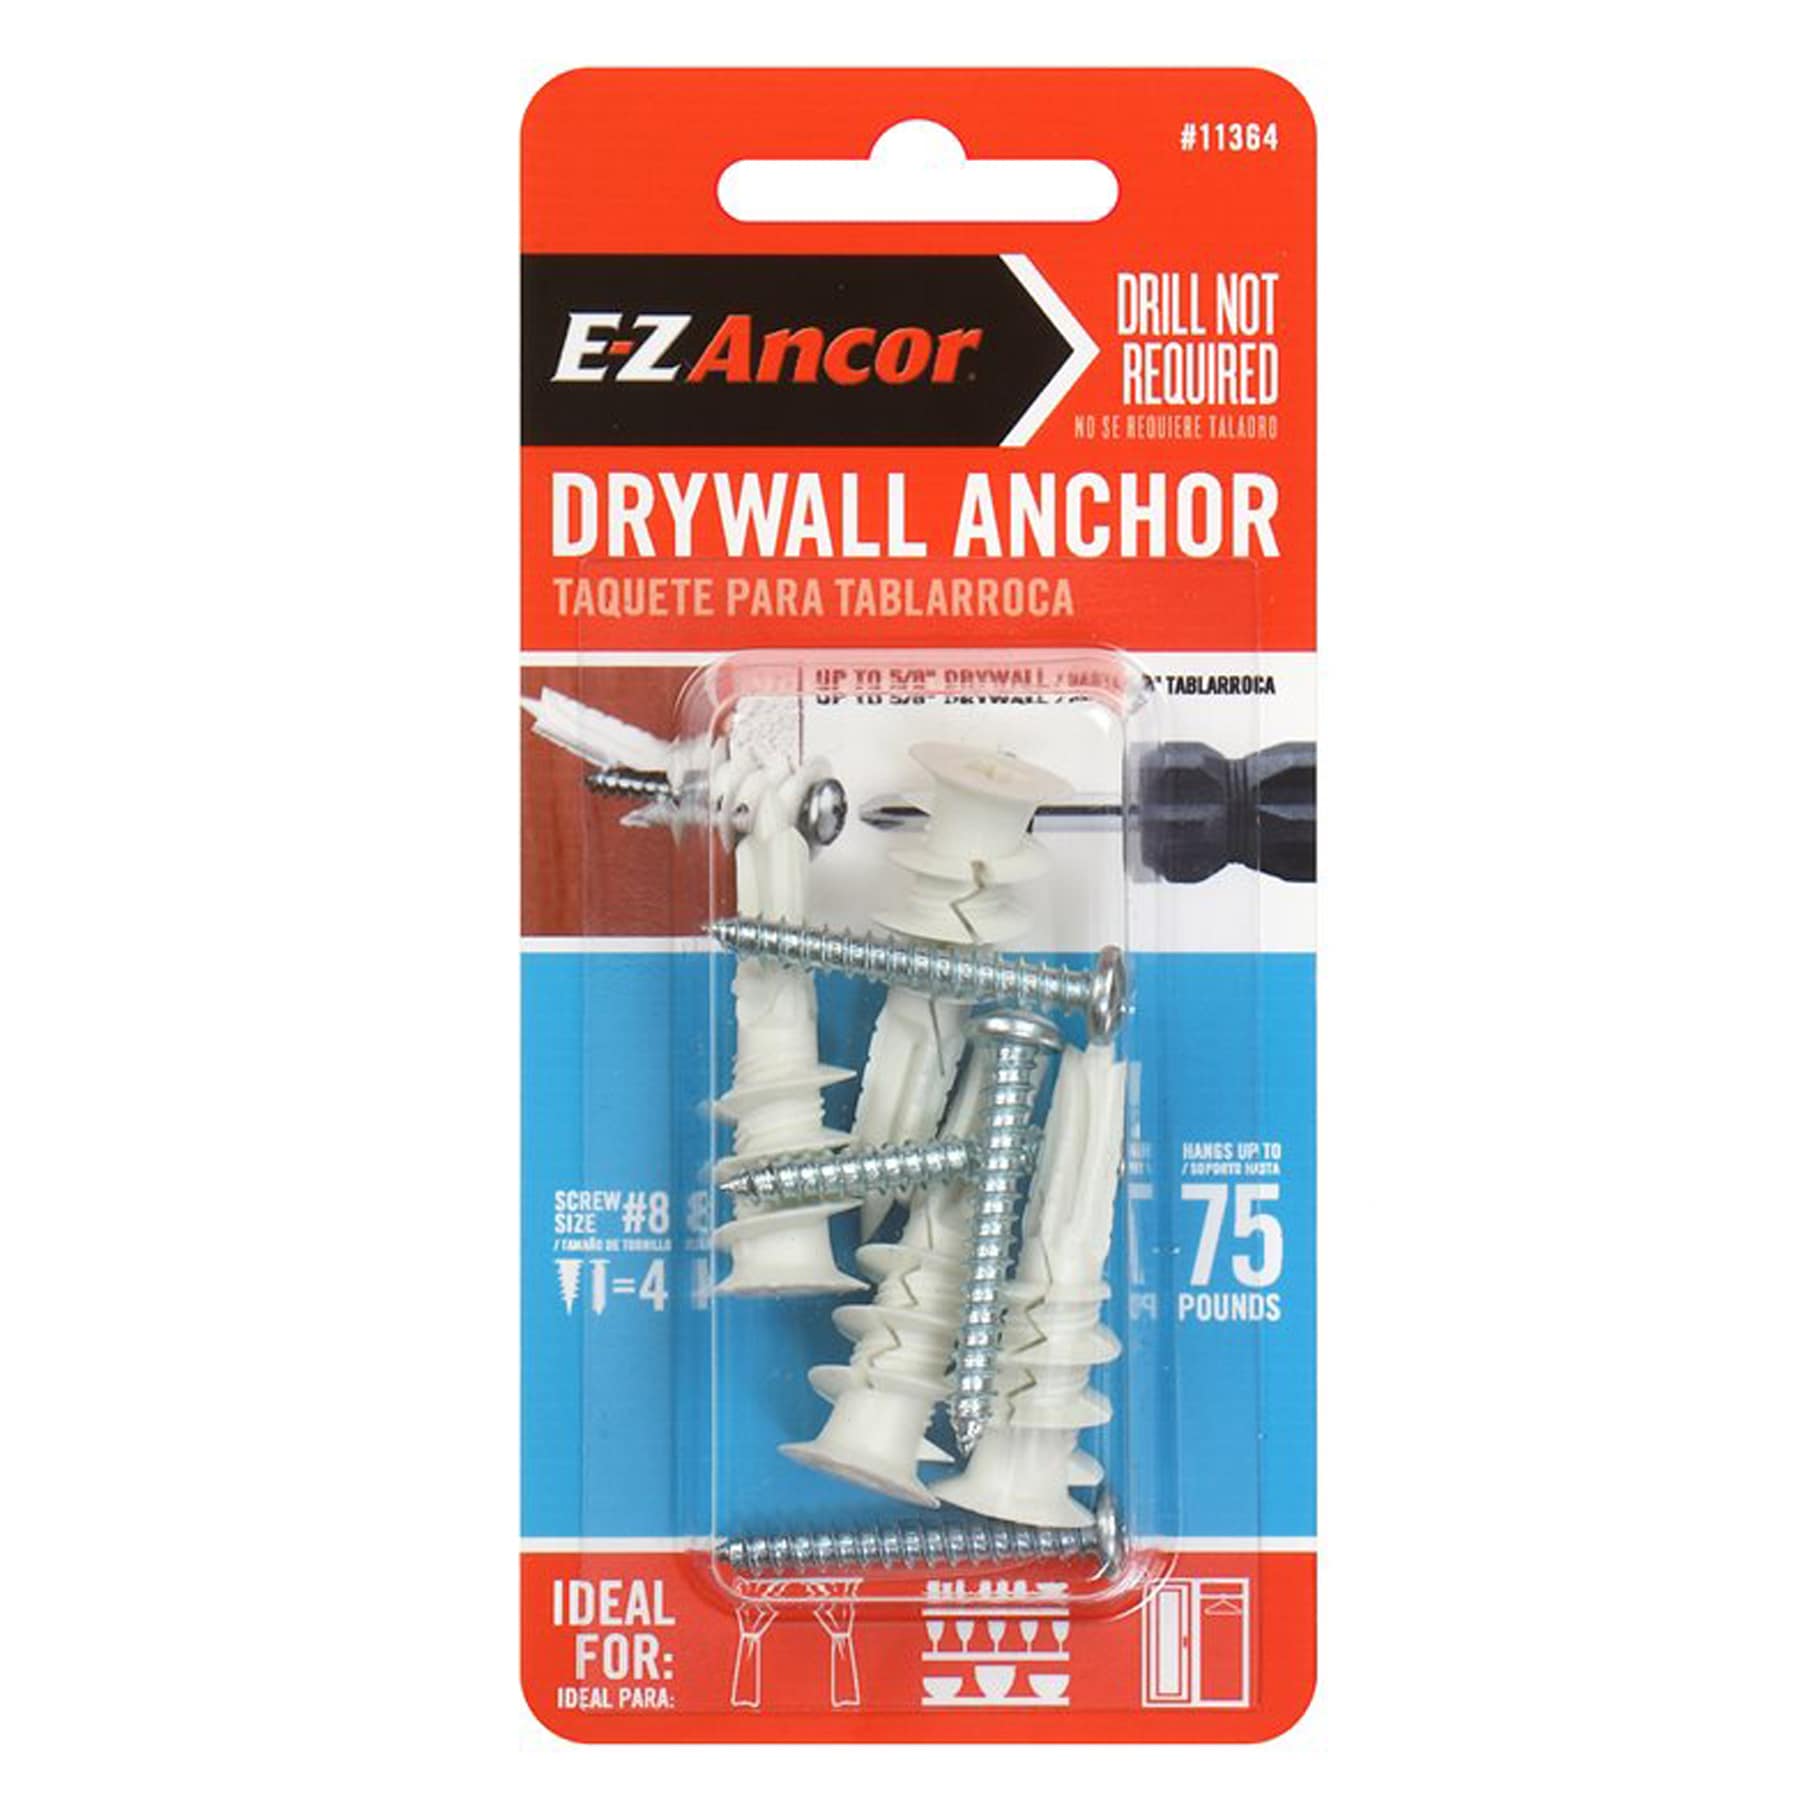 3" WALL ANCHOR SCREWS AND PLUGS 40 PIECES 